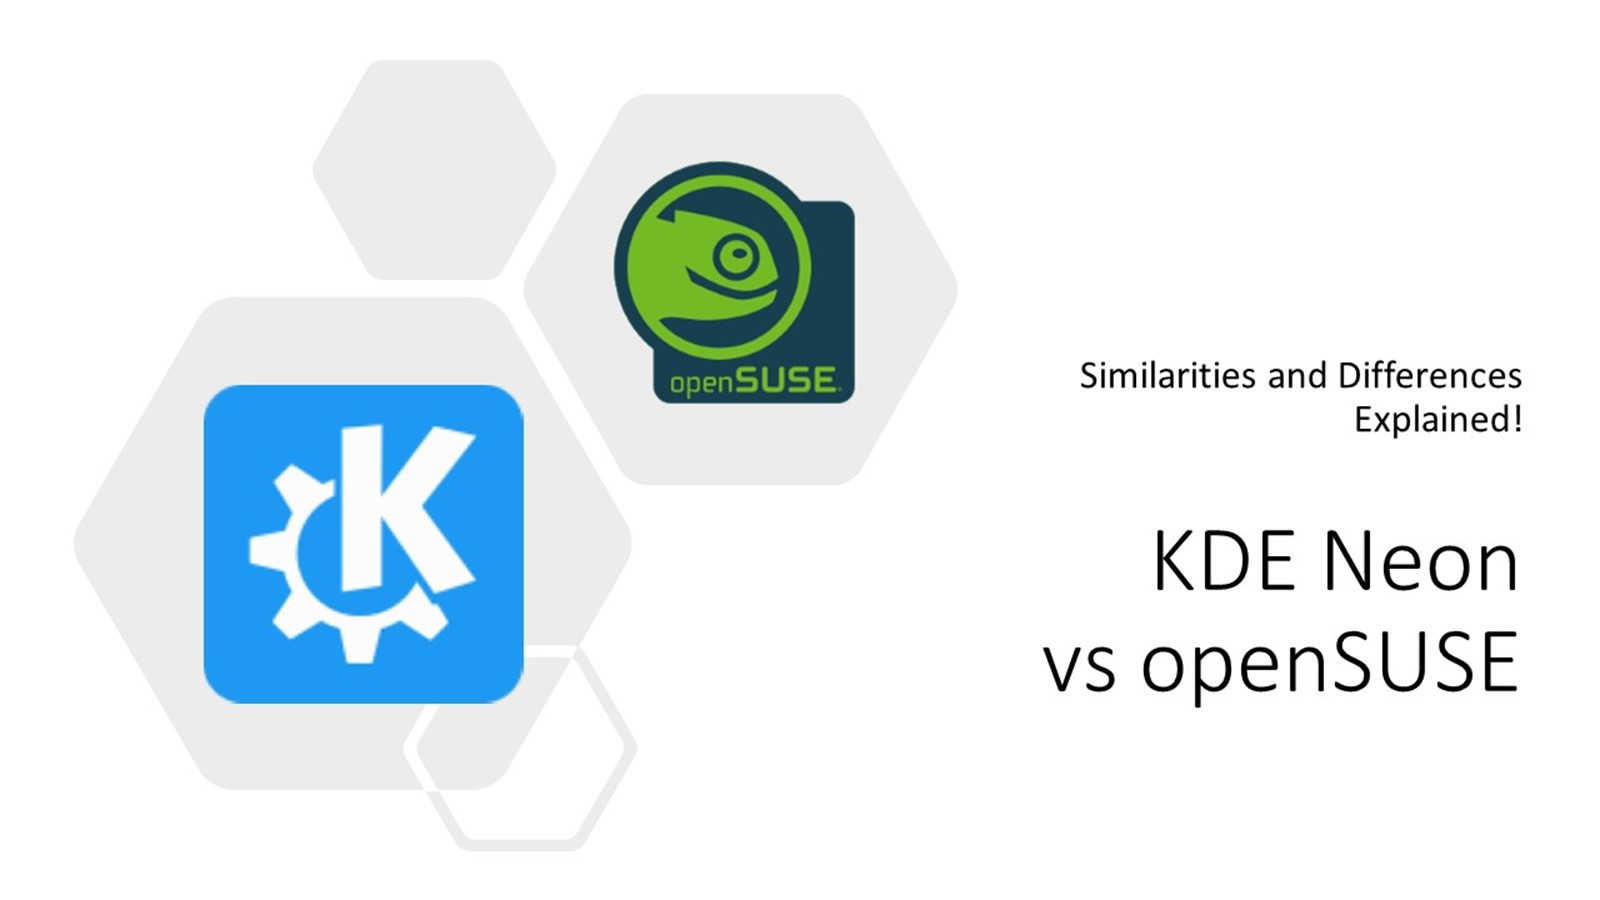 KDE Neon vs OpenSUSE: Similarities & Differences!